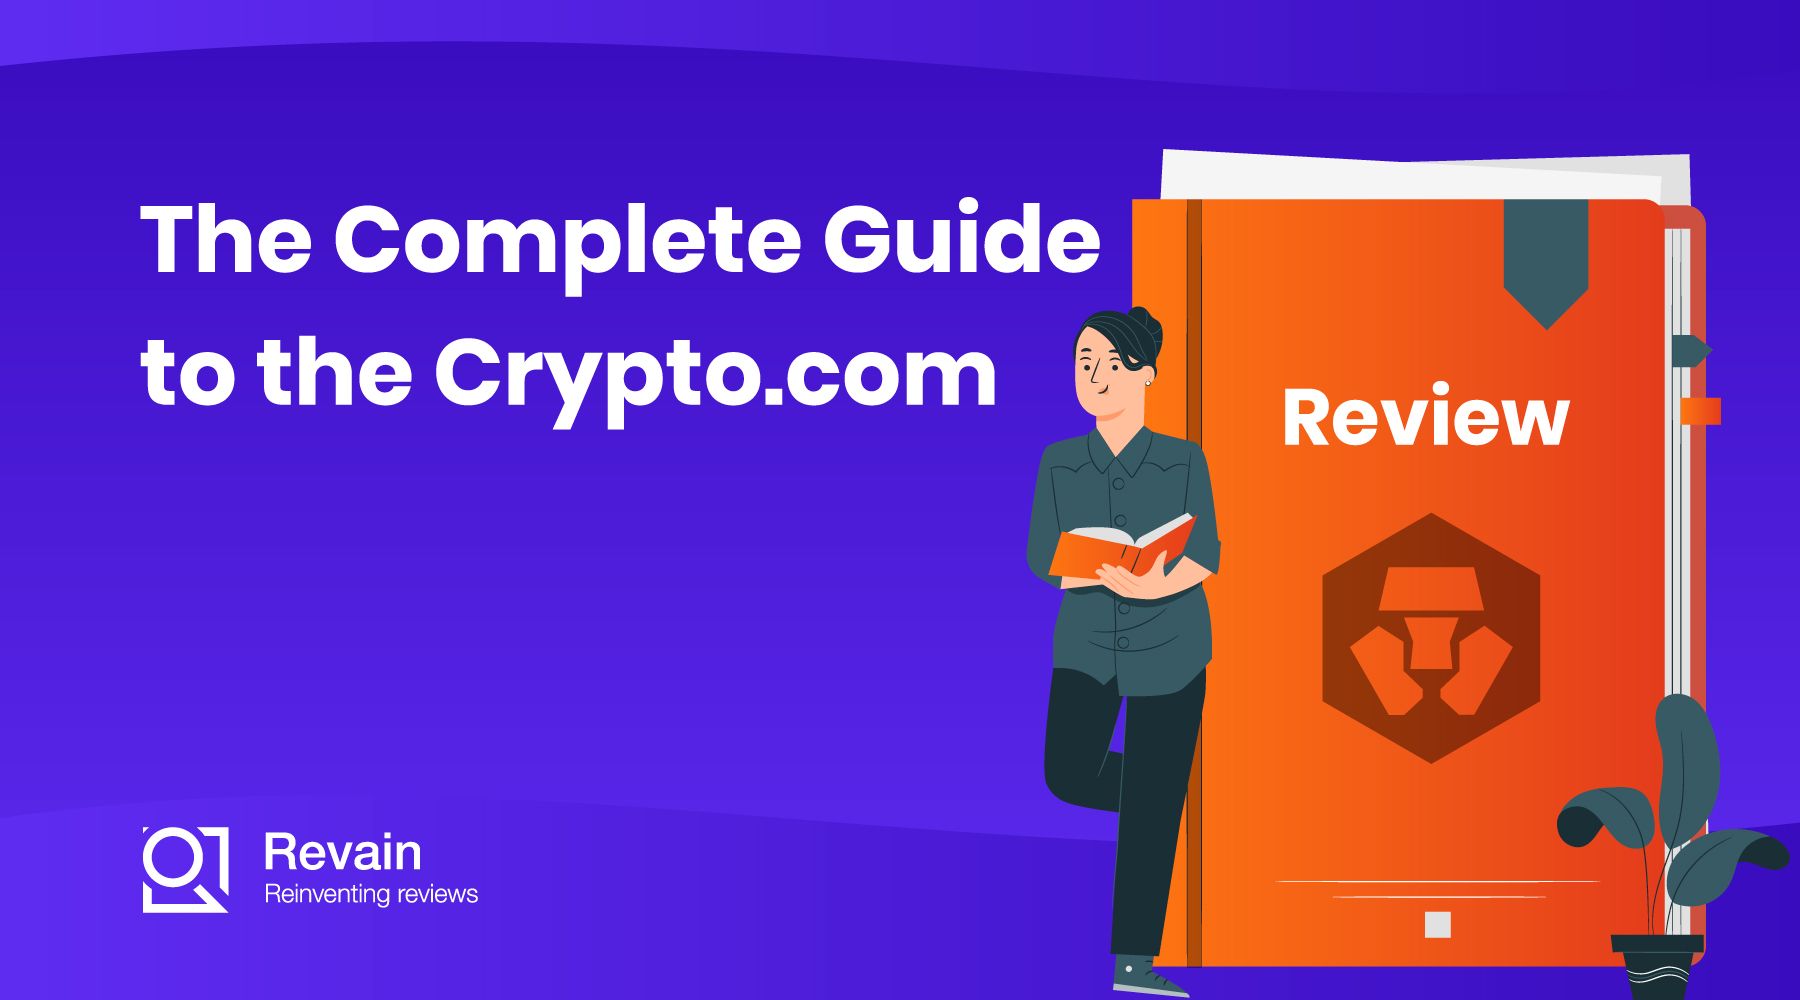 The Complete Guide to the Crypto.com